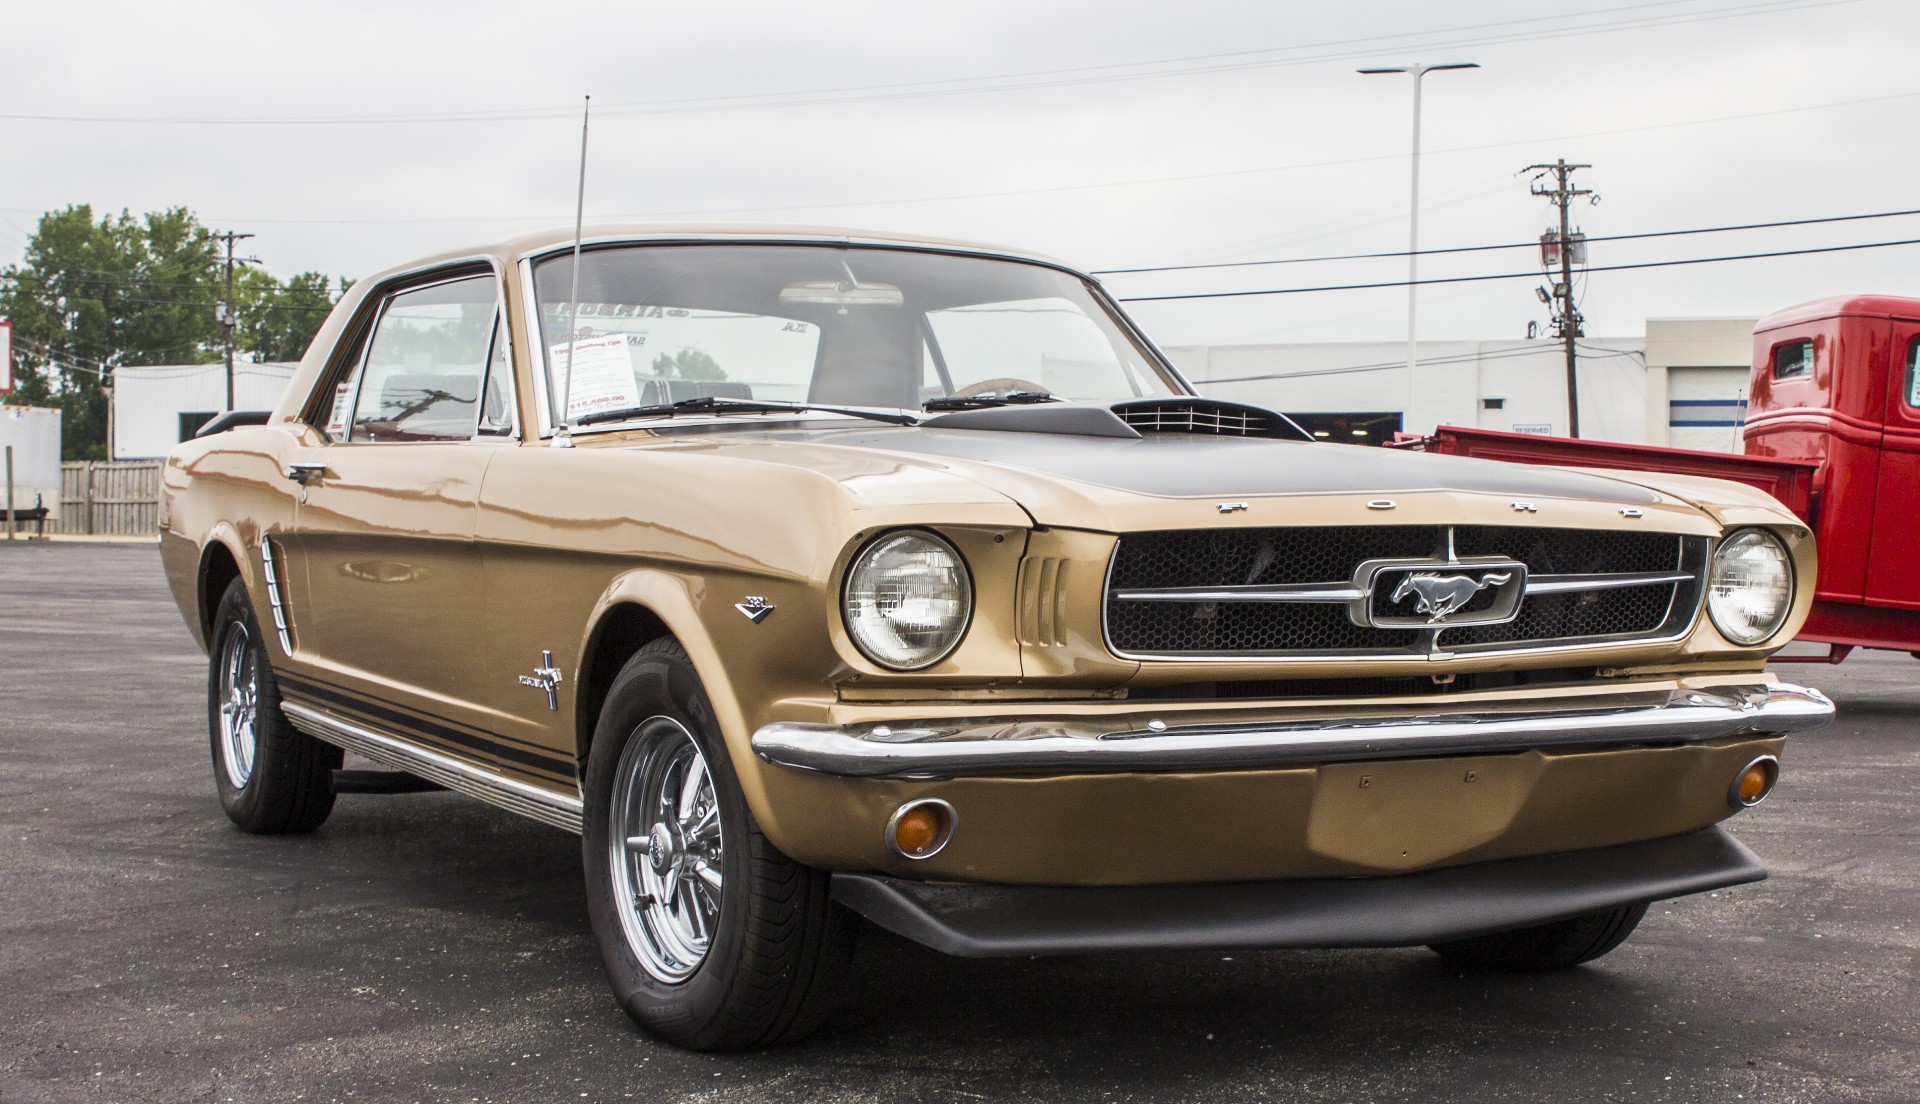 Ford,  Mustangas,  Ford & Nbsp,  Mustang,  1965,  289,  Automobiliai,  Automobiliai,  Automobiliai,  Klasikiniai & Nbsp